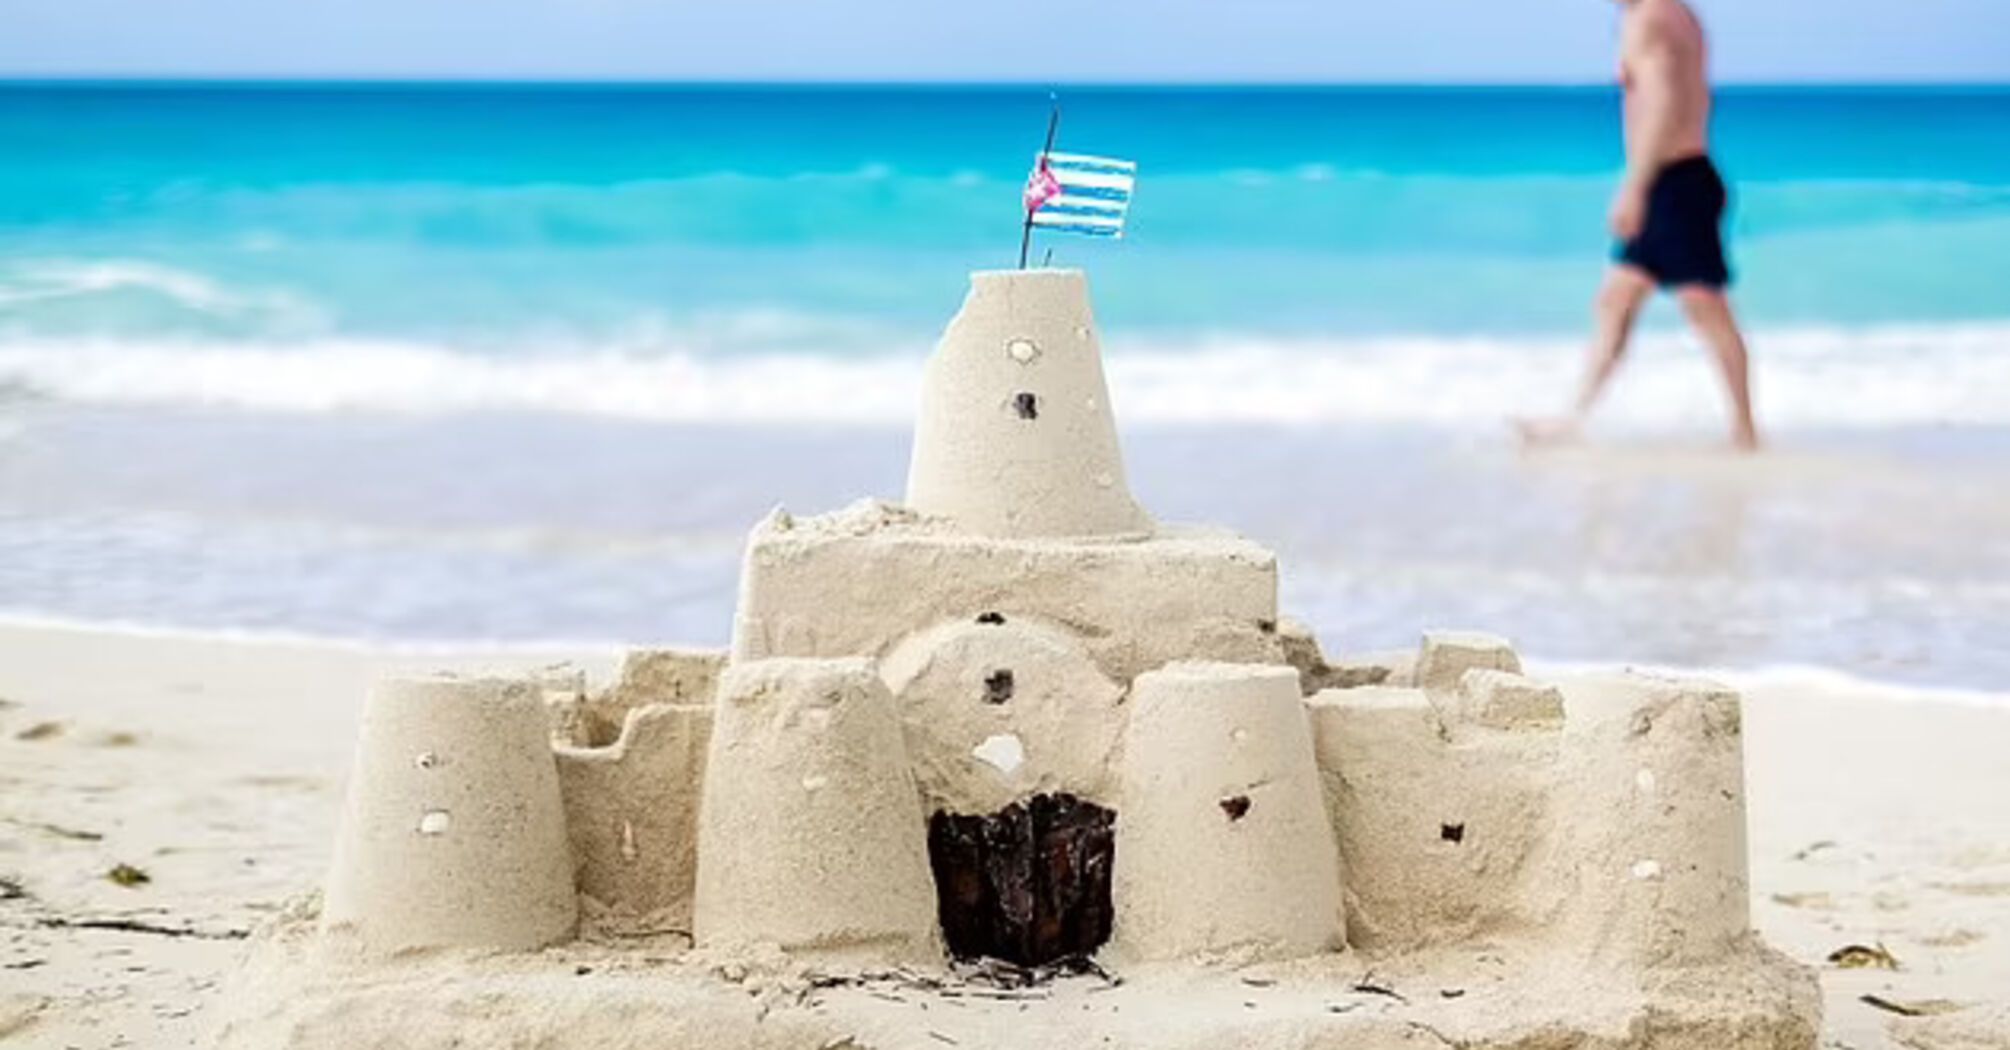 How to make a perfect sand castle